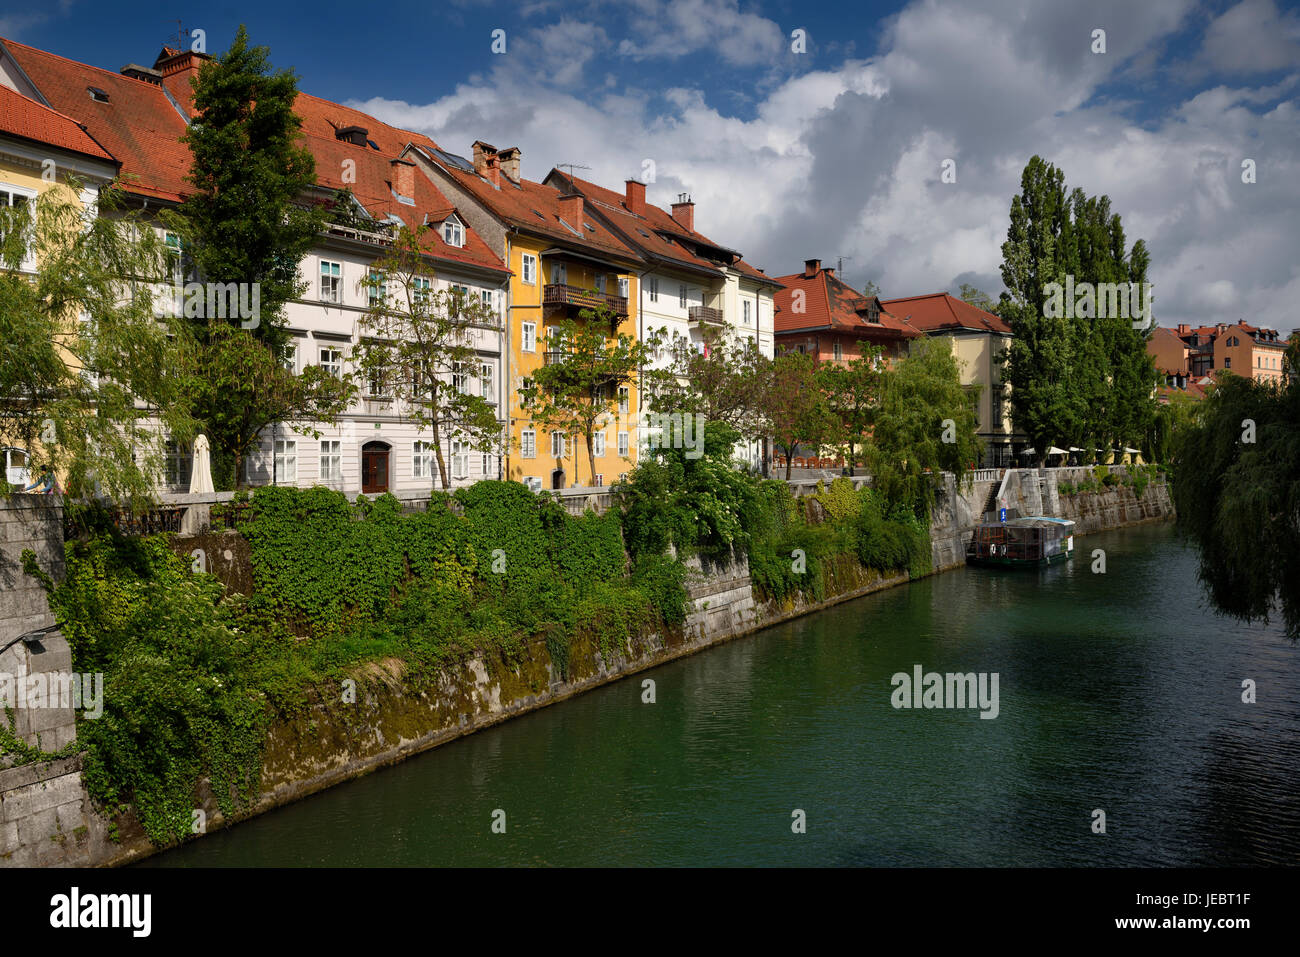 Historic houses on the ivy covered Hribar Quay embankment of the Ljubljanica river canal waterway in the old town of Ljubjlana Slovenia Stock Photo